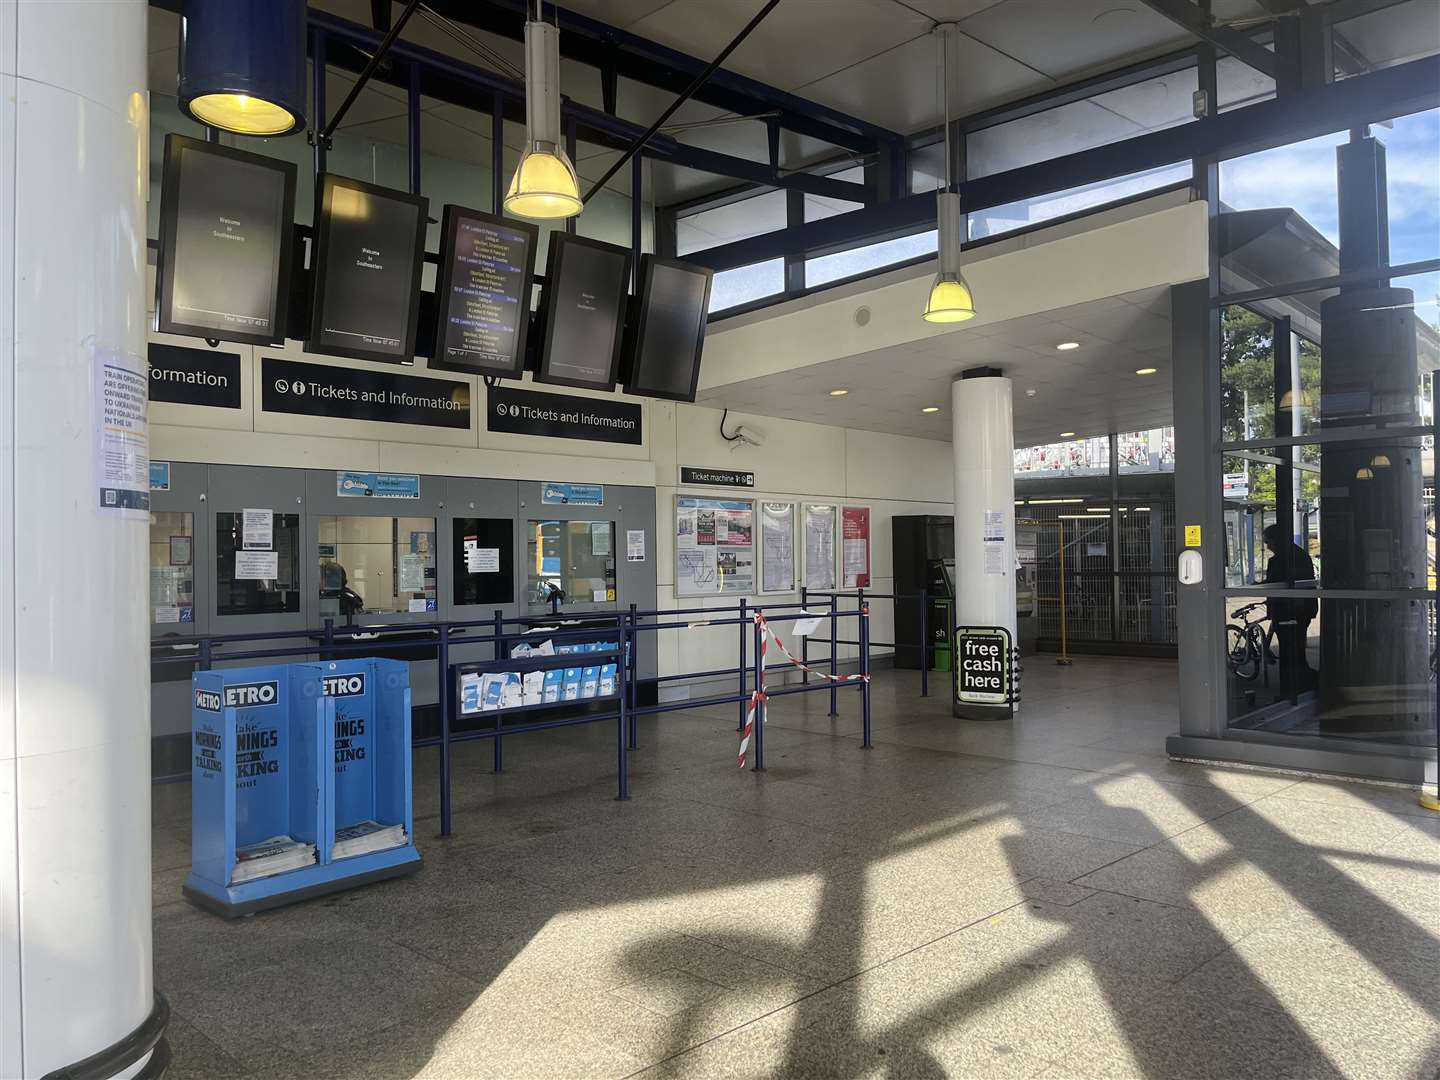 Stations will be empty again as rail strikes hit the county